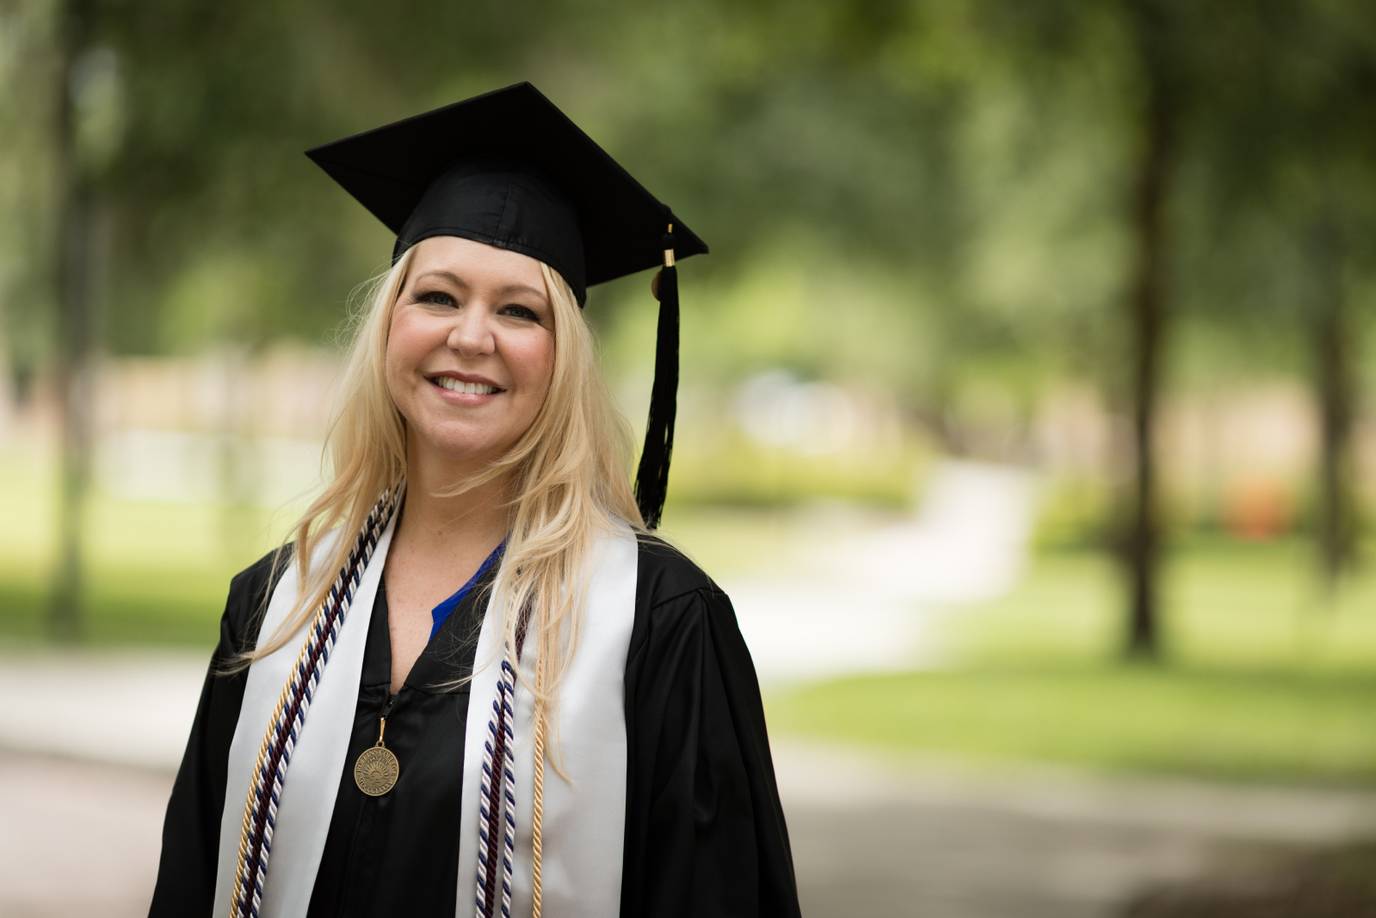 Shannon Burrows outside on campus wearing a cap and gown for commencement.